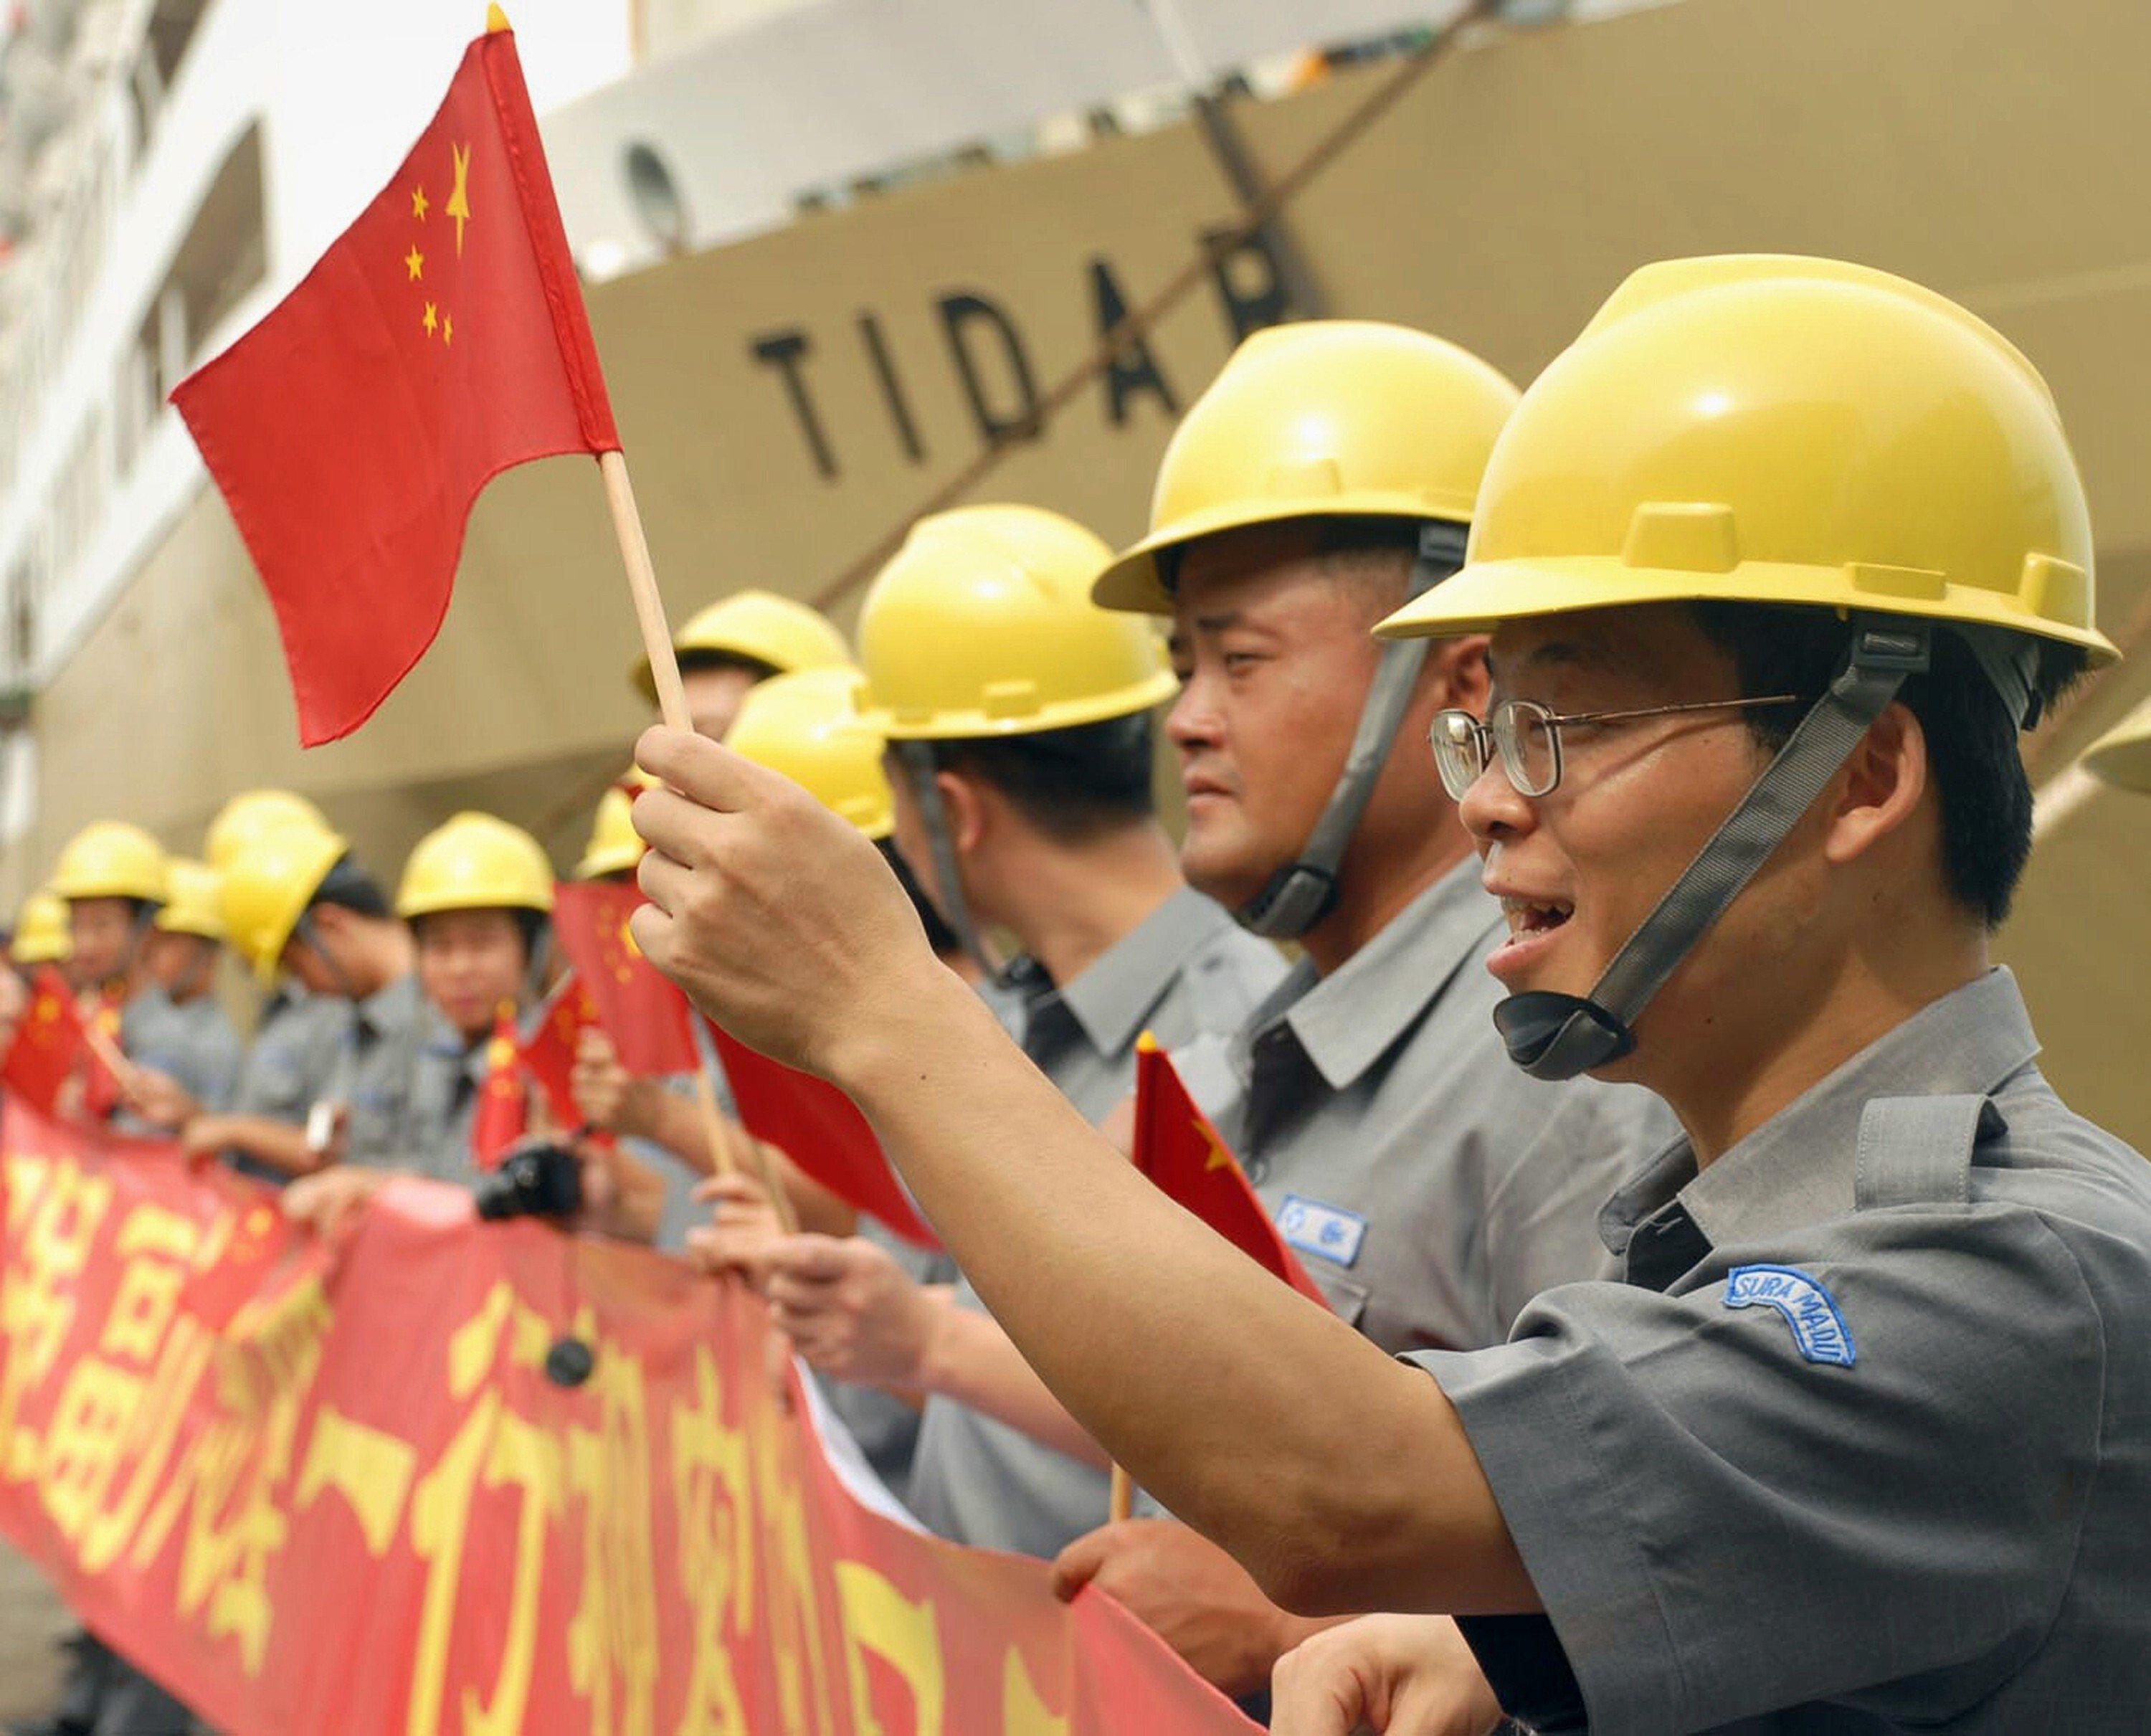 Workers wave Chinese flags during China Vice-Premier Li Keqiang’s visit to the Suramadu bridge in Surabaya, East Java, on December 21, 2008. File photo: AFP